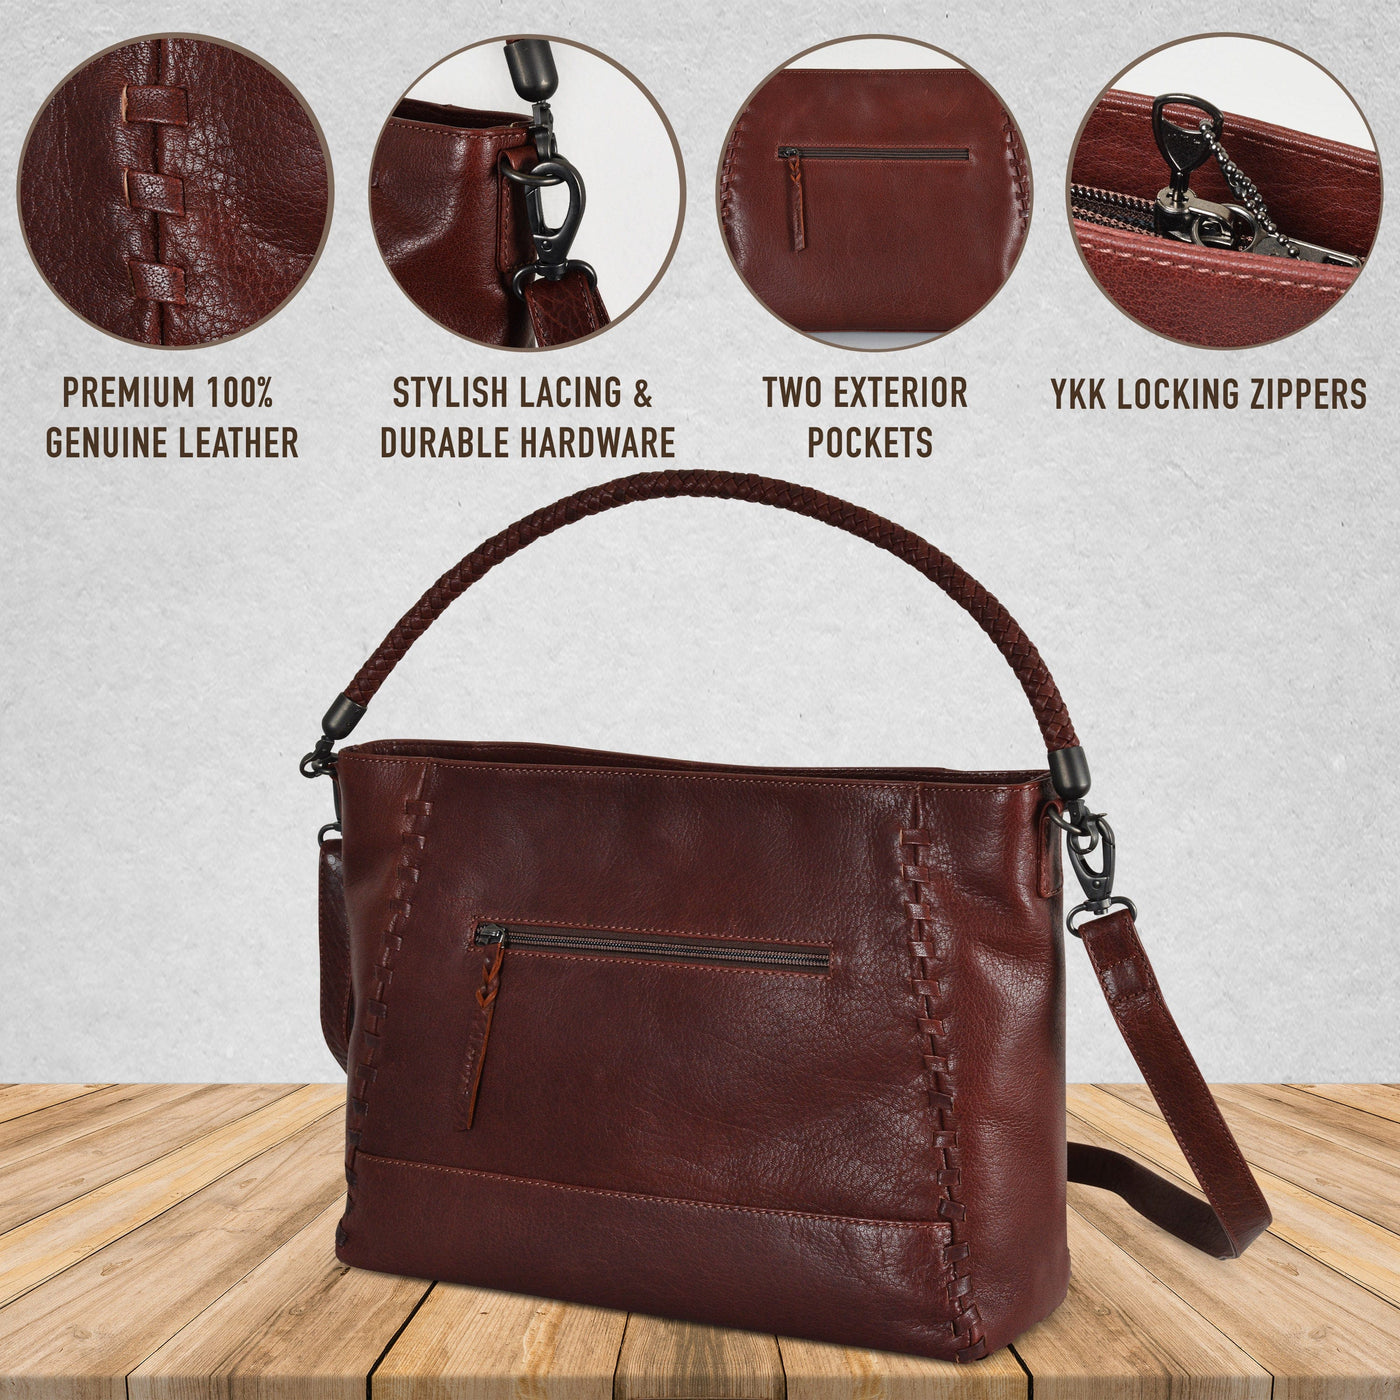 Concealed Carry Lacey Leather Tote -  Lady Conceal -  Designer Luxury Lacey Tote Carry Handbag -  YKK Locking Zippers and Universal Holster -  Unique Hide Handbag Gun and Pistol Bag -  Designer Luxury Lacey Leather Carry Handbag -  carry Handbag for gun carry -  Unique Lacey Tote gun Handbag - 	 concealed carry gun Handbag -  concealed carry gun Handbag with locking zipper -  concealed carry Handbag for woman